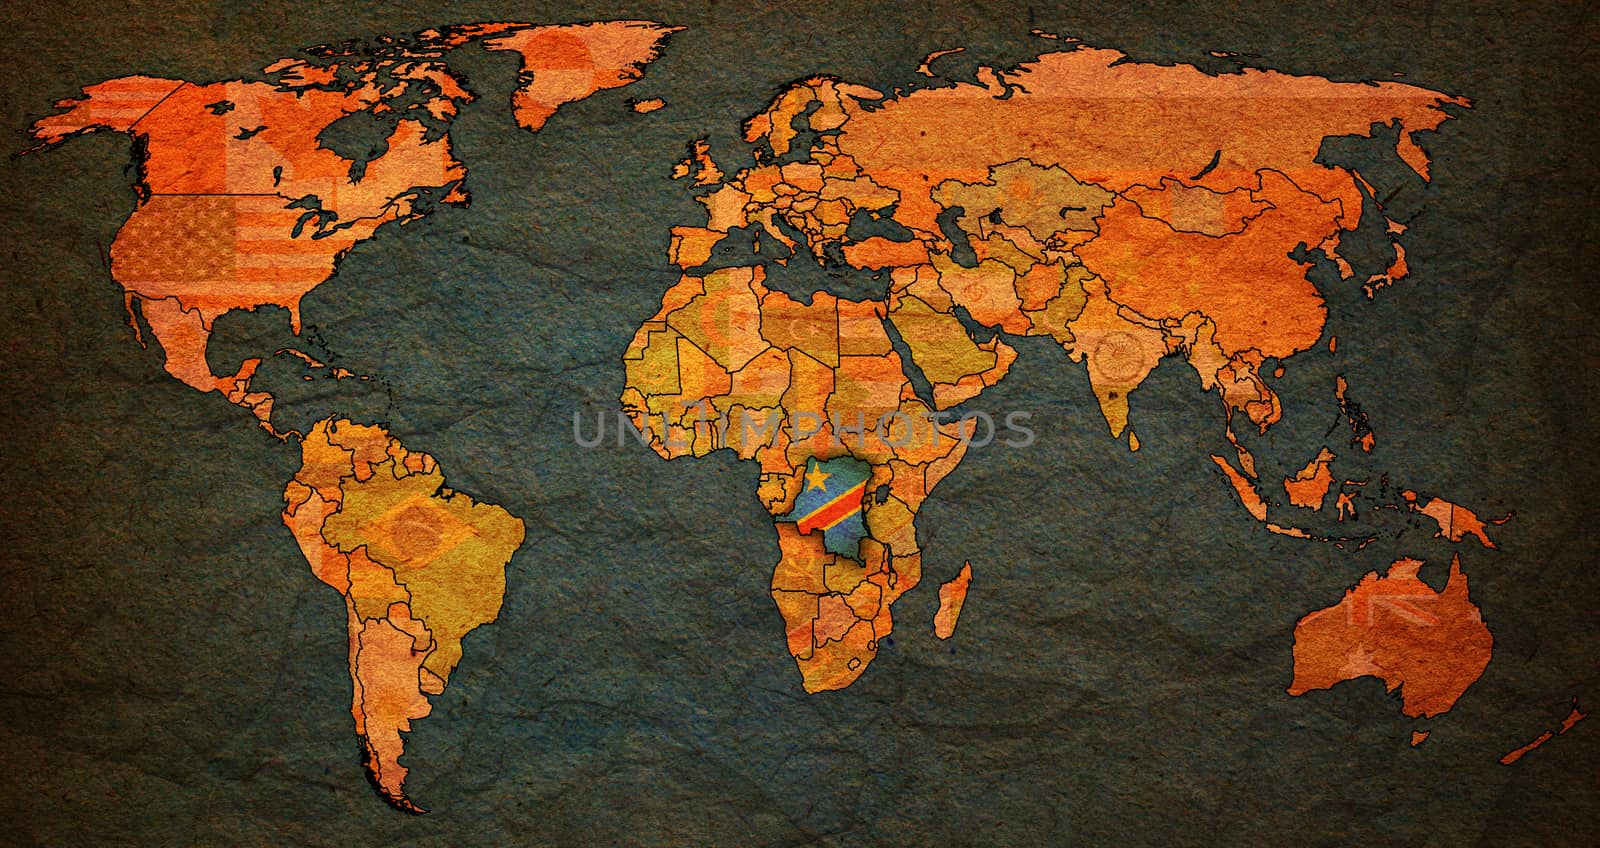 democratic republic of congo territory on world map by michal812